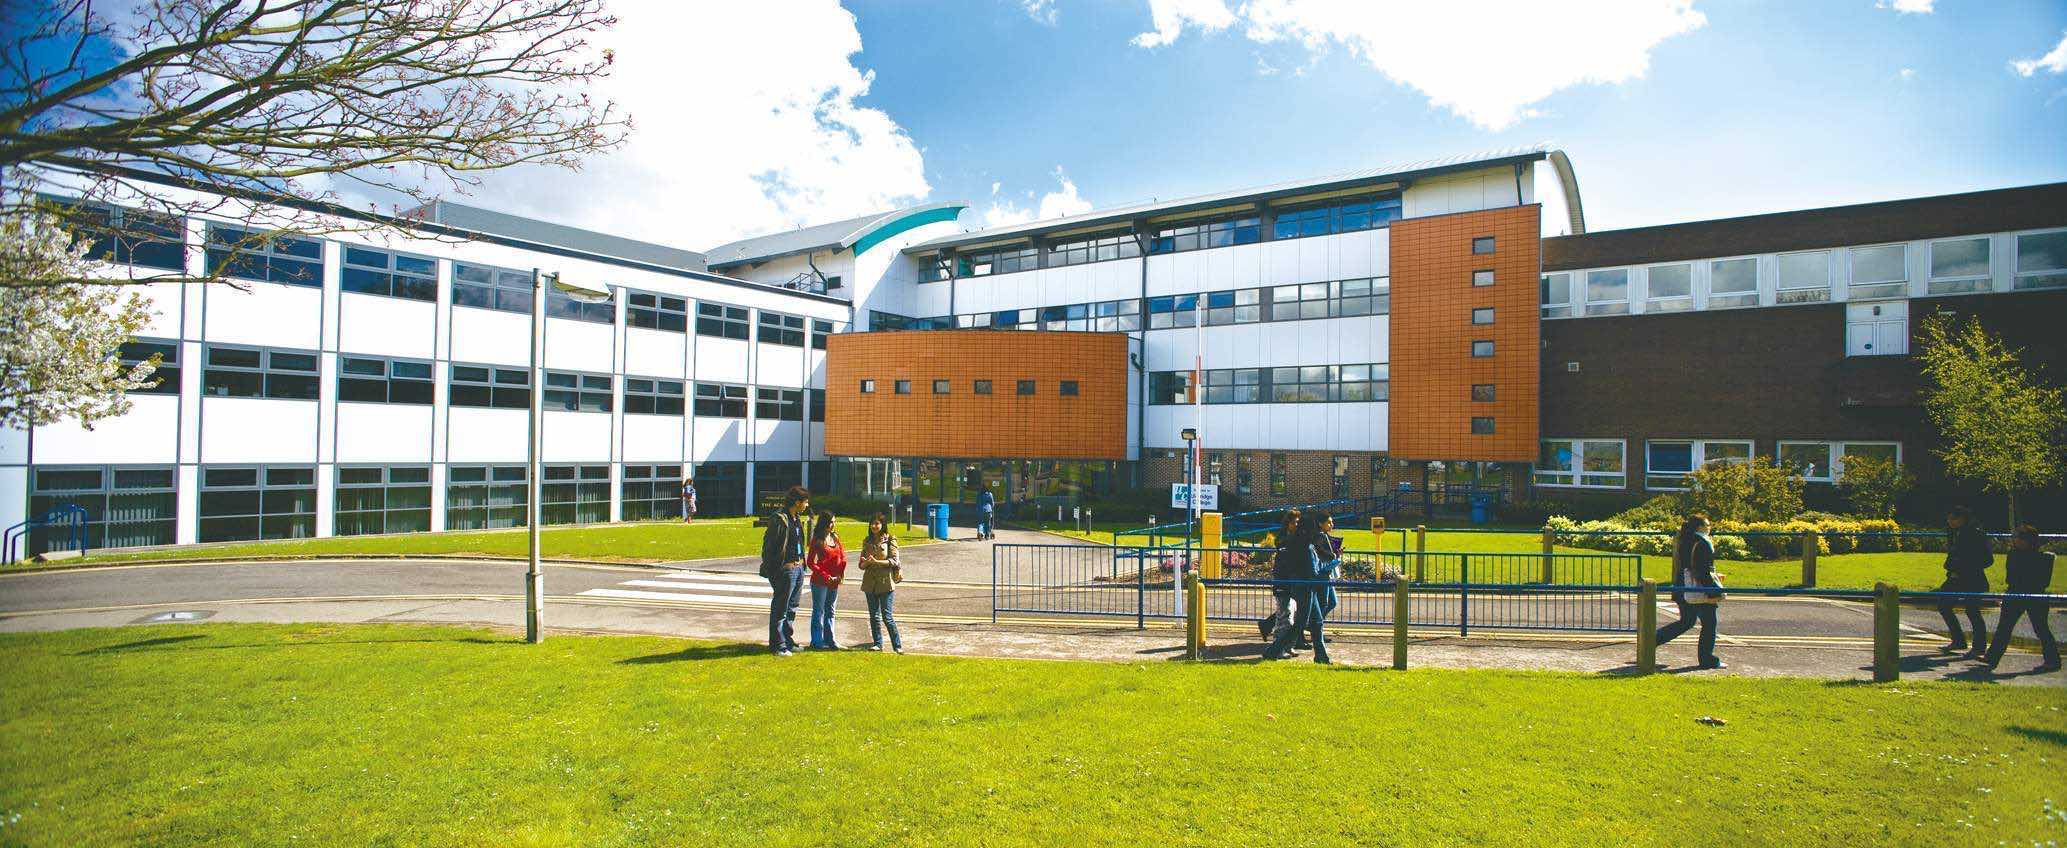 Cirencester College Image 1